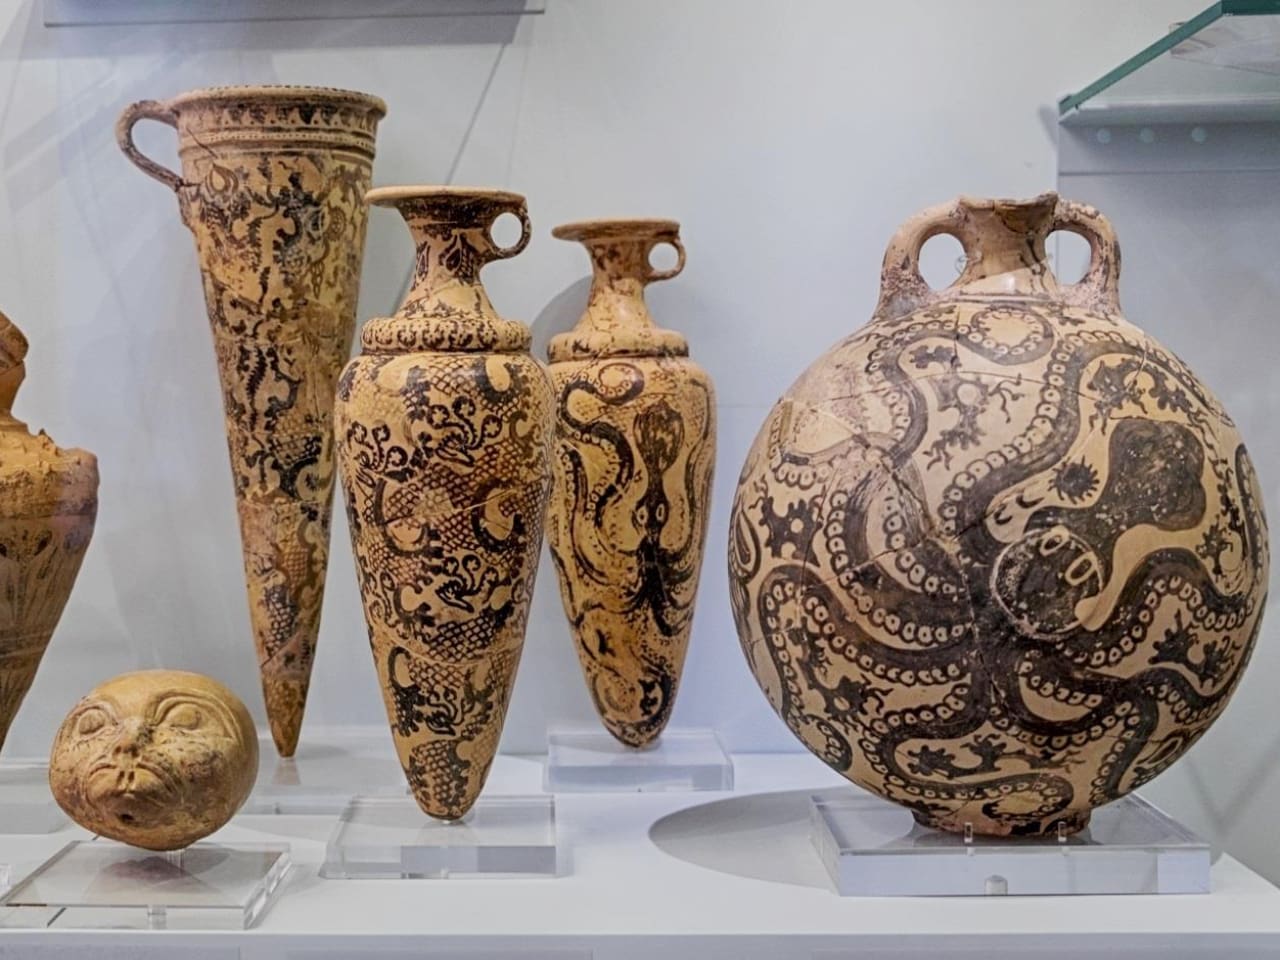 Archaeological Museum of Heraklion is in the Top 3 museums